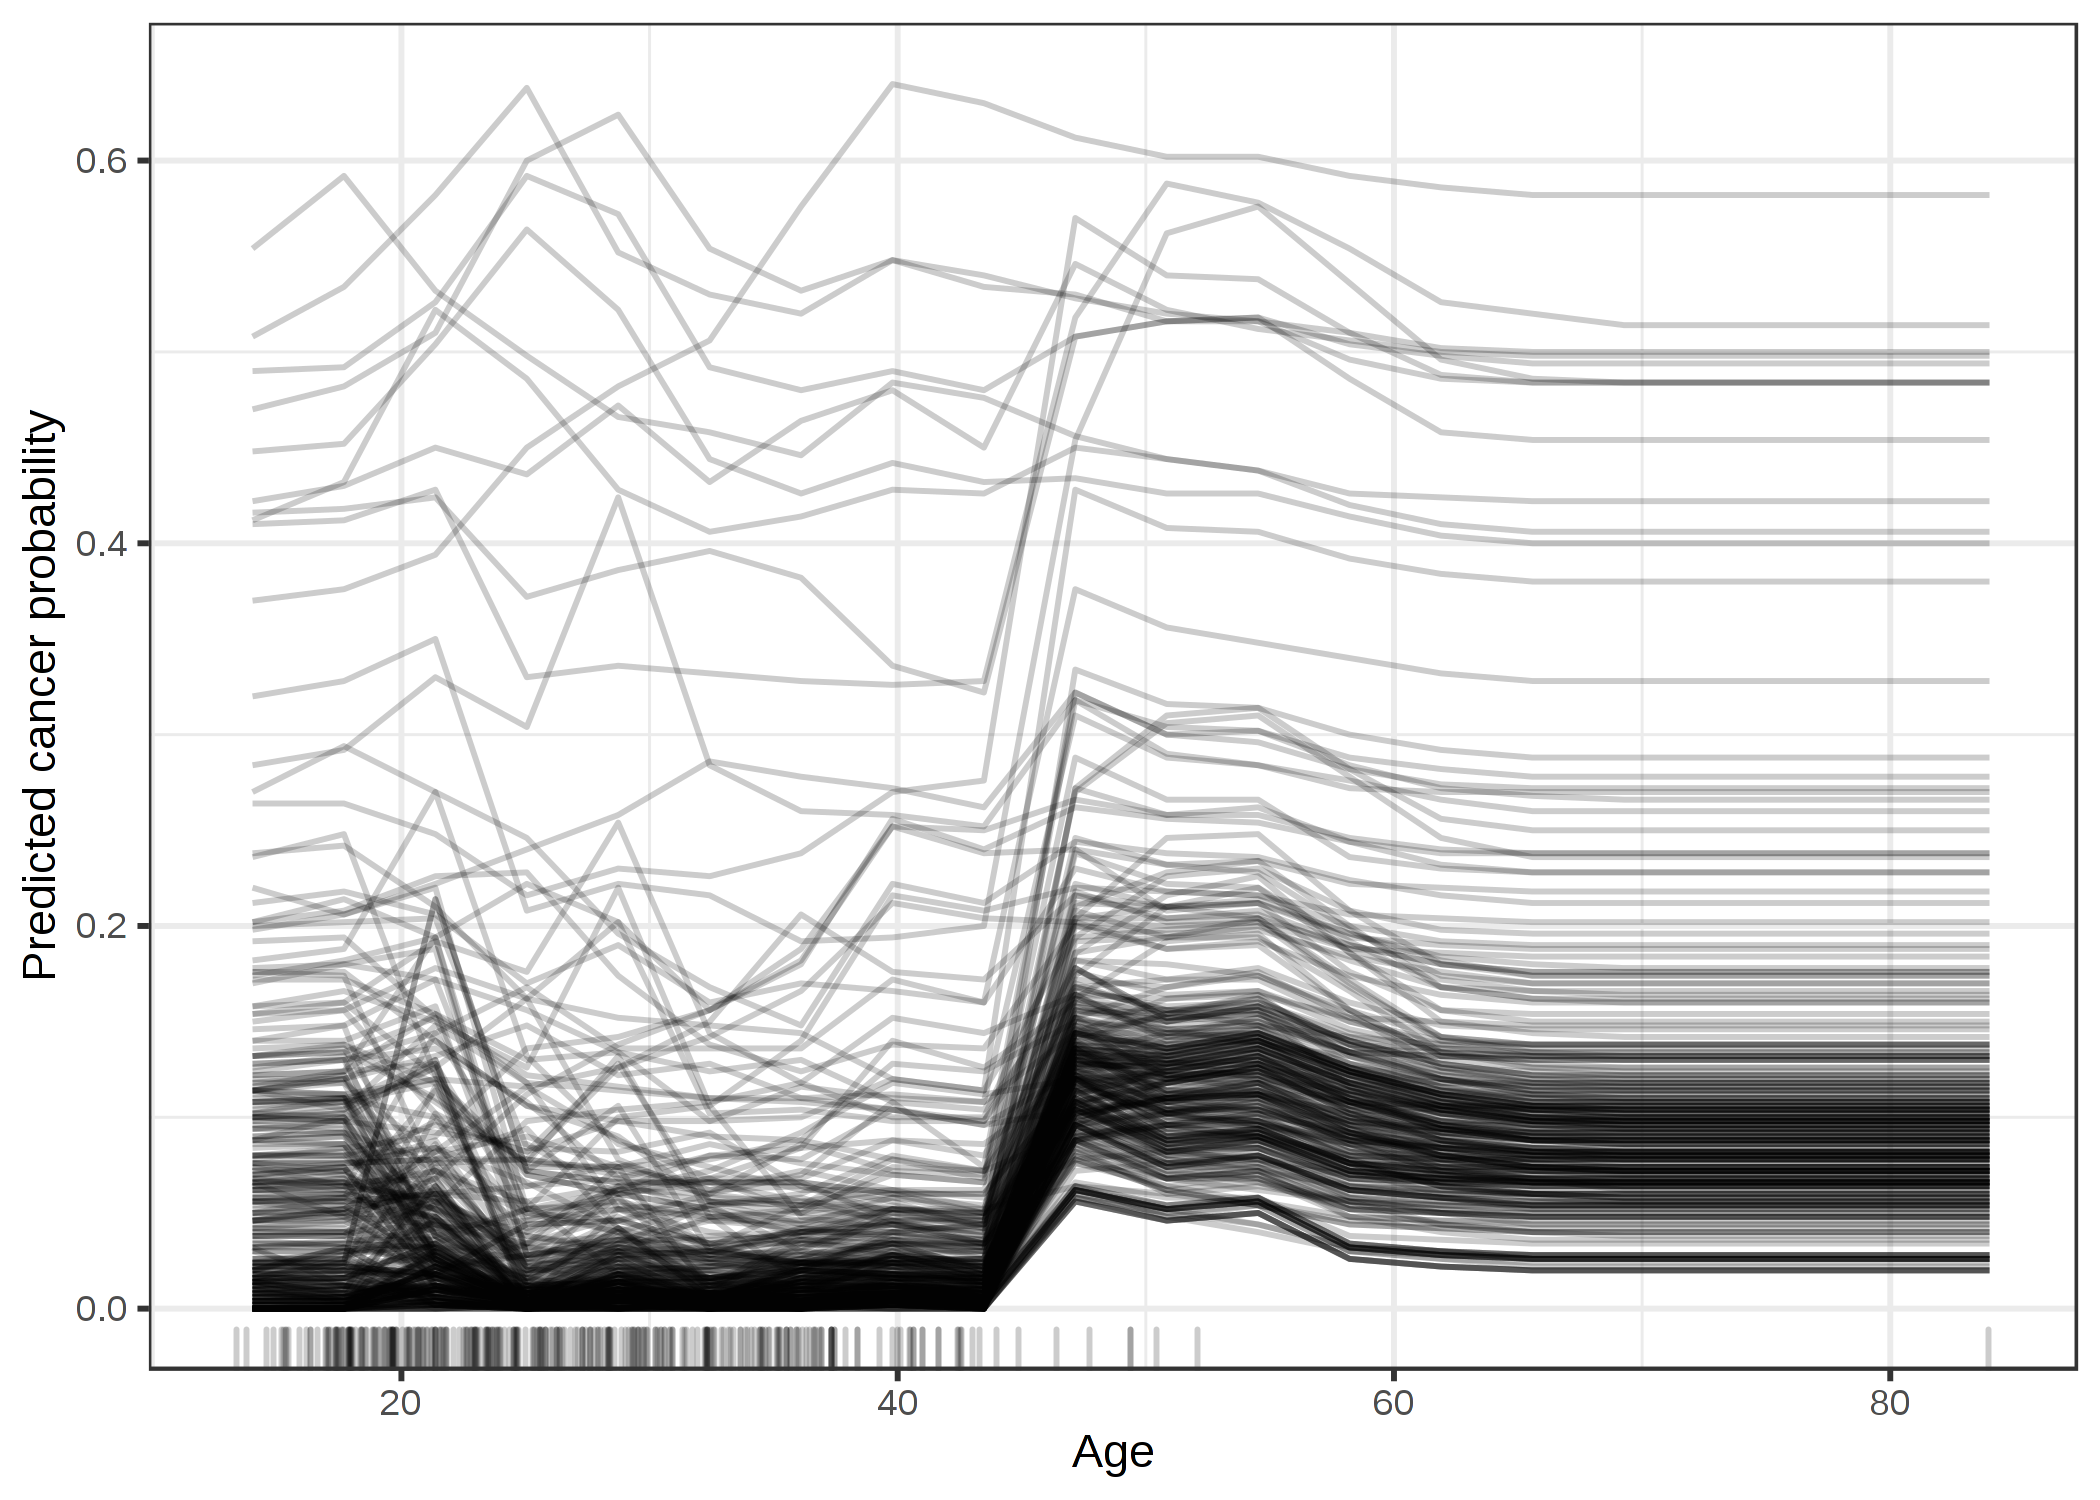 ICE plot of cervical cancer probability by age. Each line represents one woman. For most women there is an increase in predicted cancer probability with increasing age. For some women with a predicted cancer probability above 0.4, the prediction does not change much at higher age.